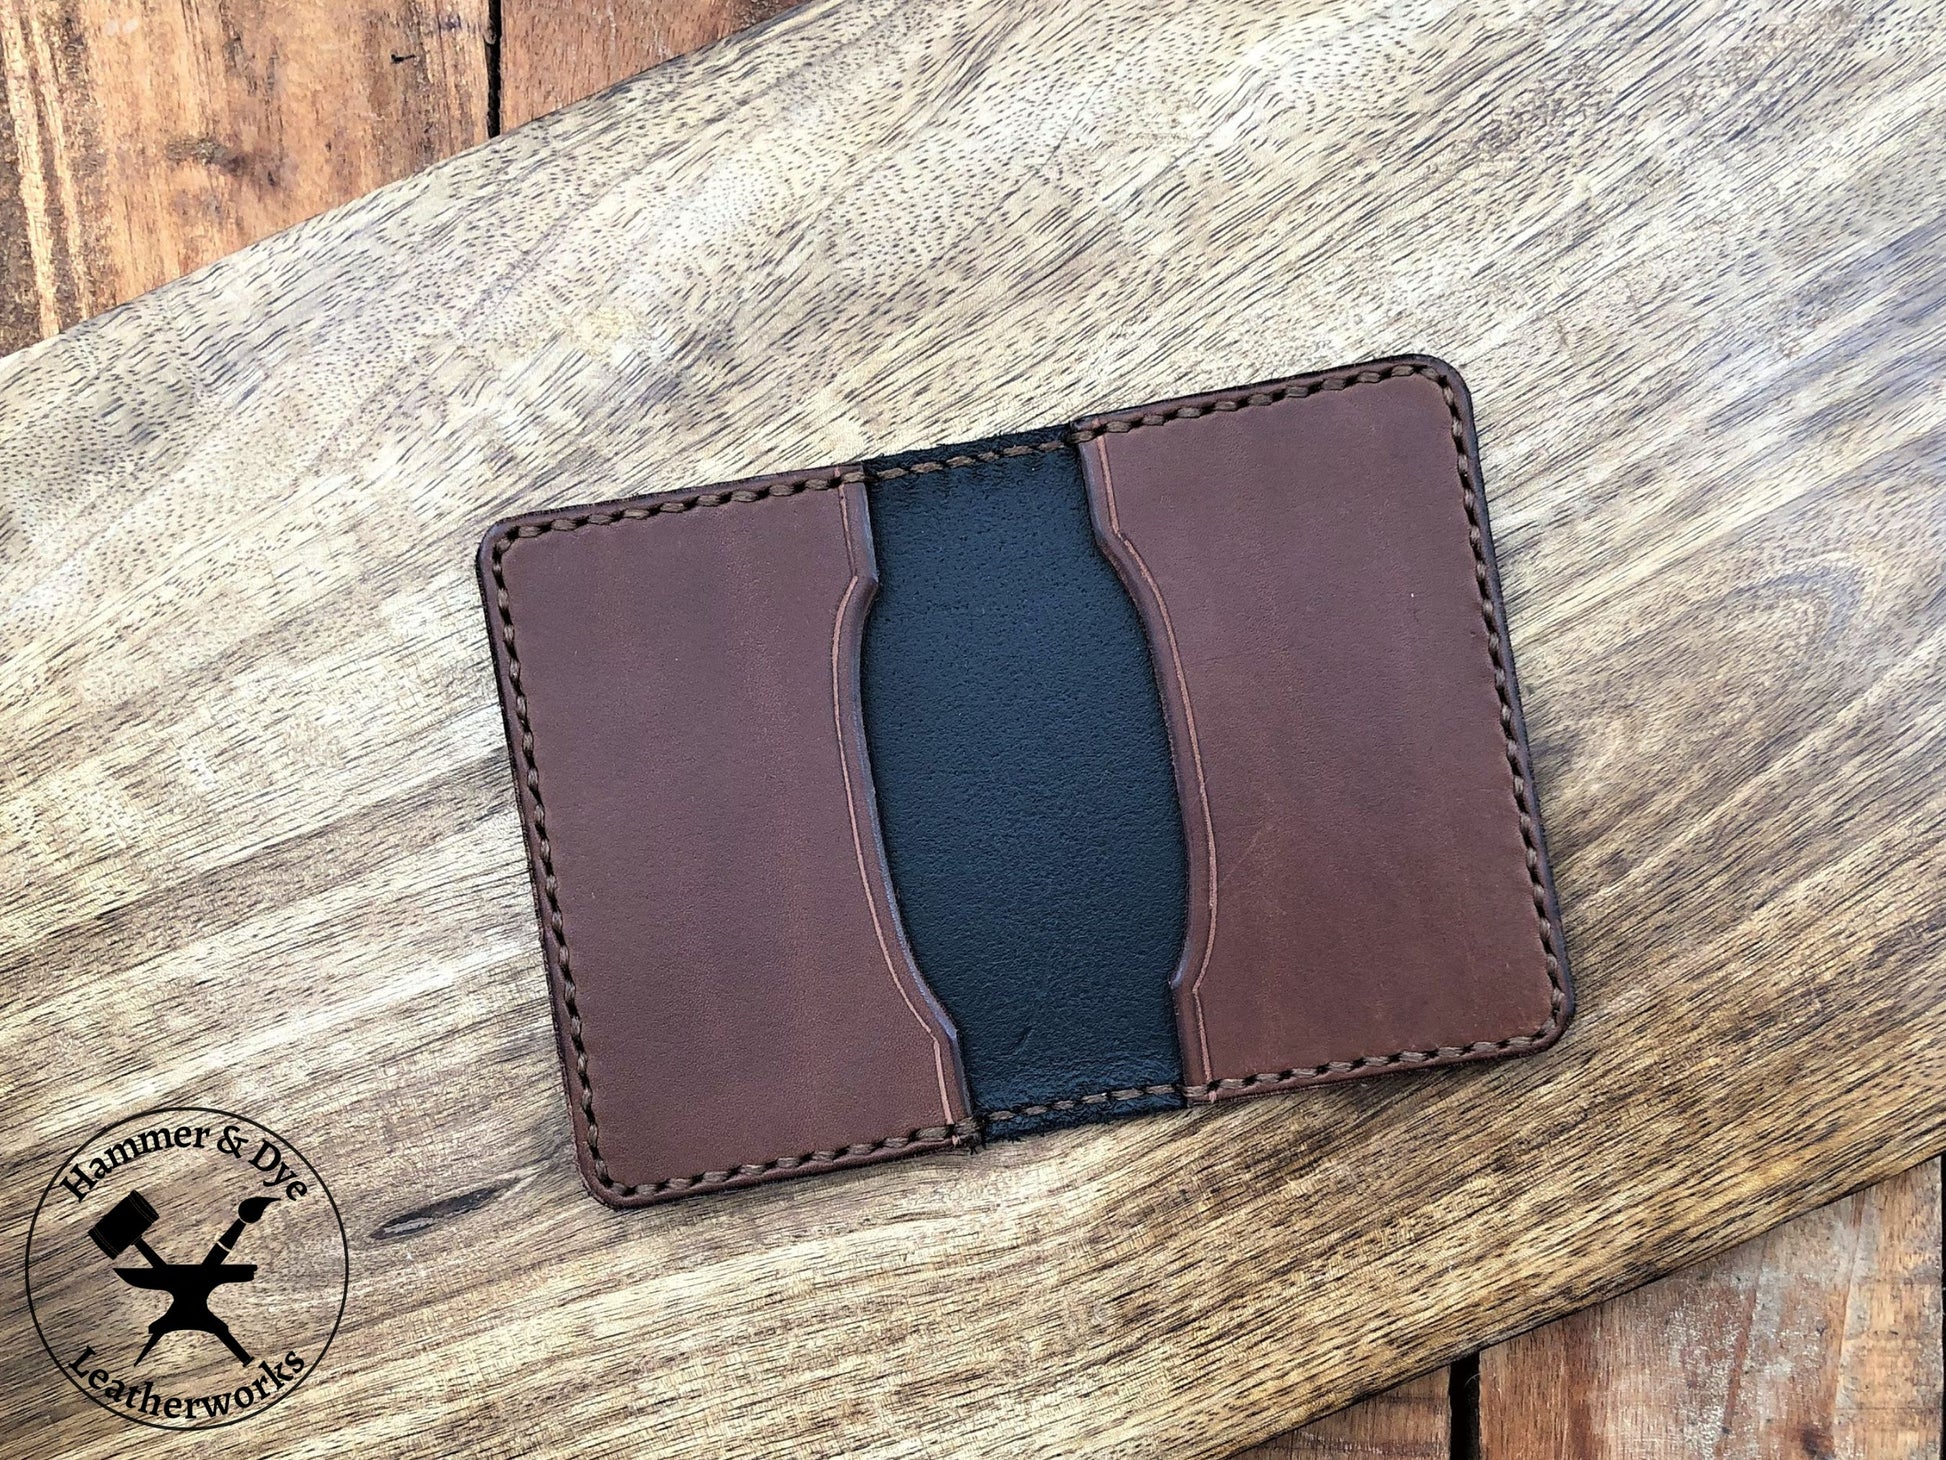 Handmade Two-tone Bifold Leather Card Wallet in Black and Brown with brown stitching empty